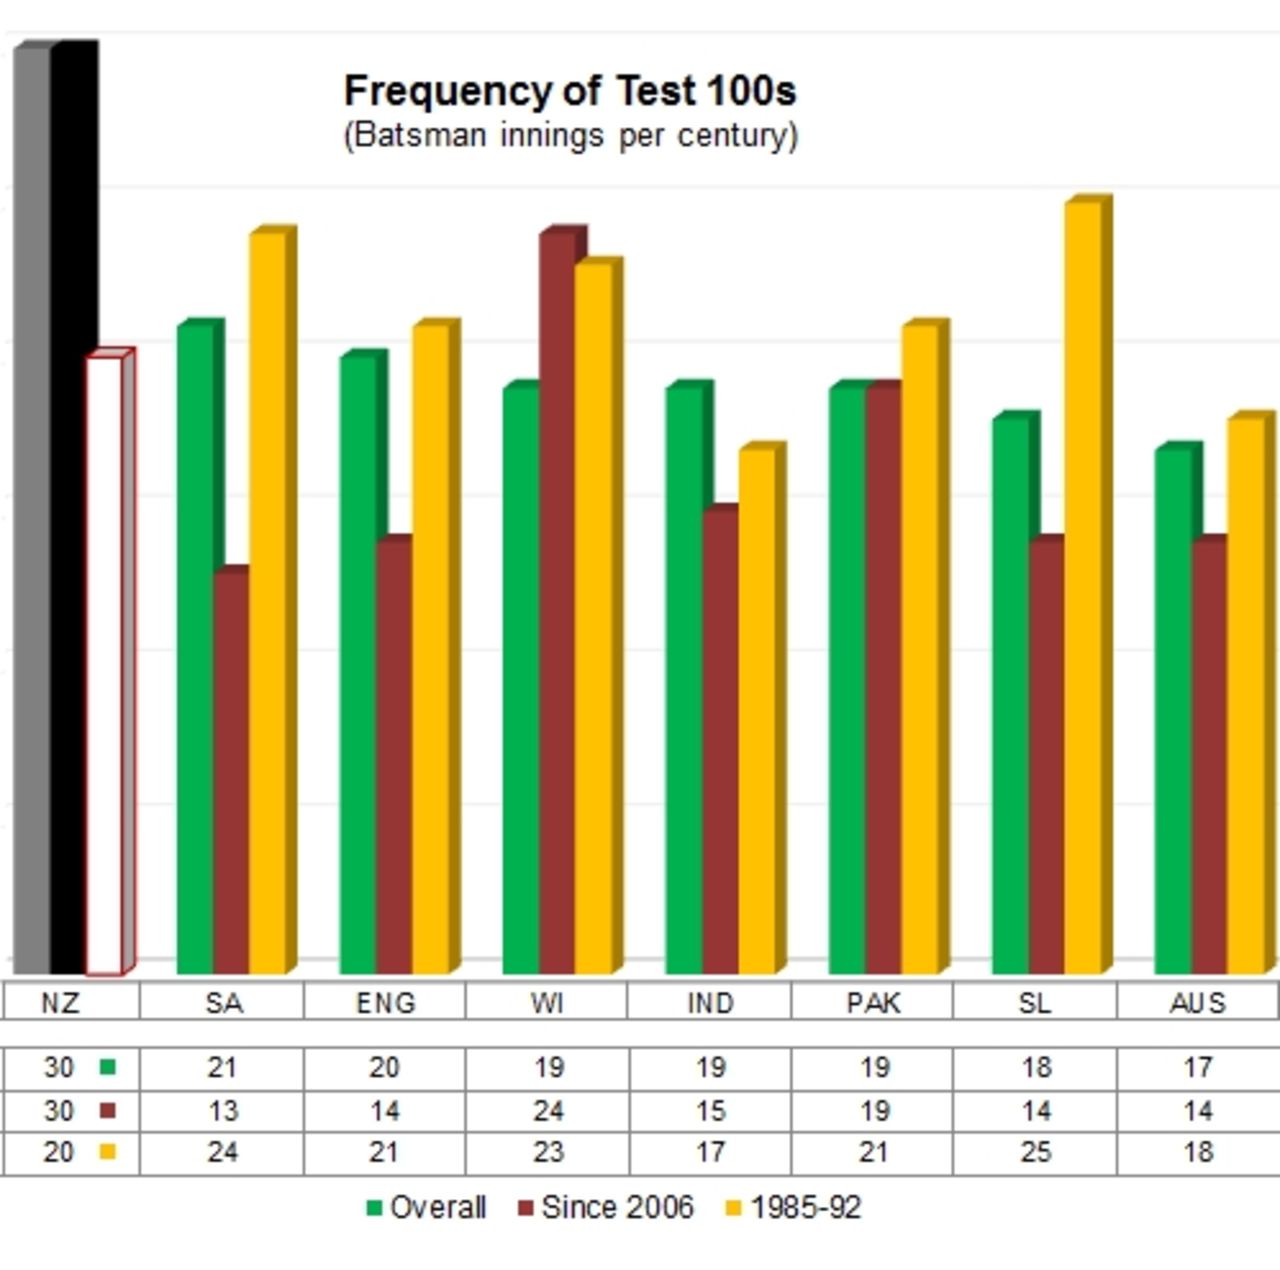 Graph: Frequency of Test hundreds by batsmen of leading Test nations since 1986